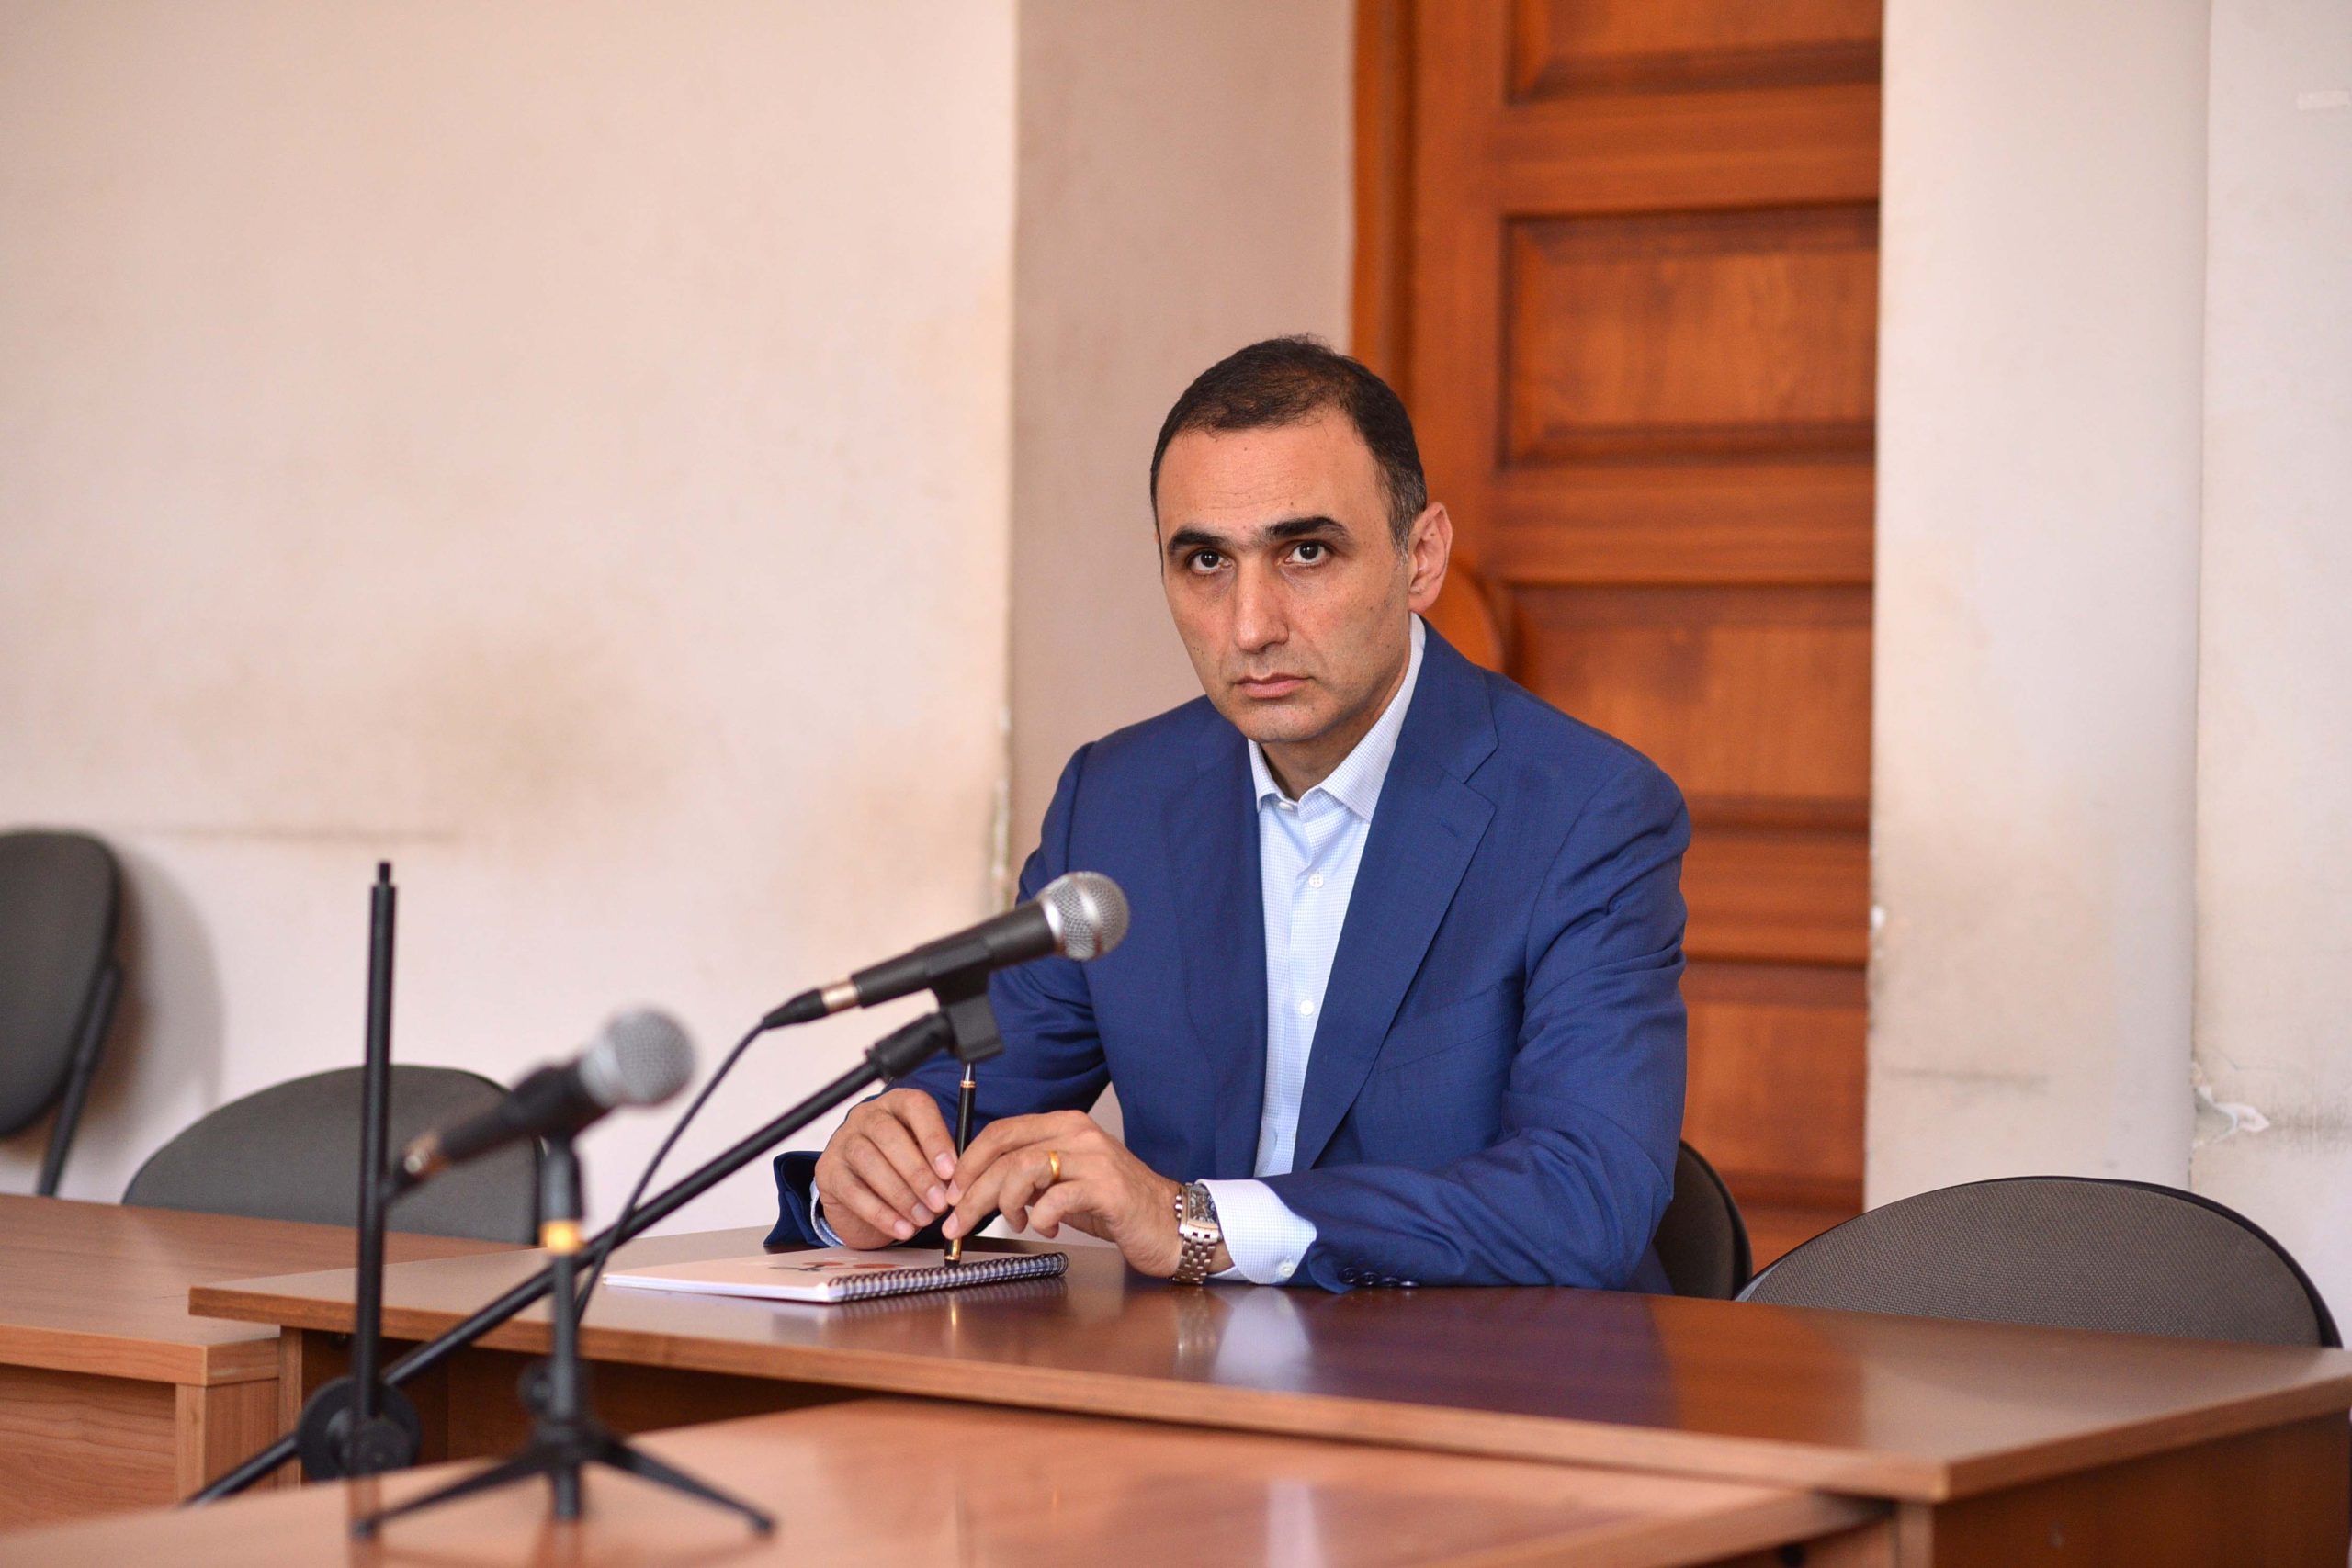 Avetik Chalabyan accused Prime Minister Pashinyan of the crime of consistently disbanding the defense of Armenia and depriving RA citizens of protection. he was detained for another 3 months